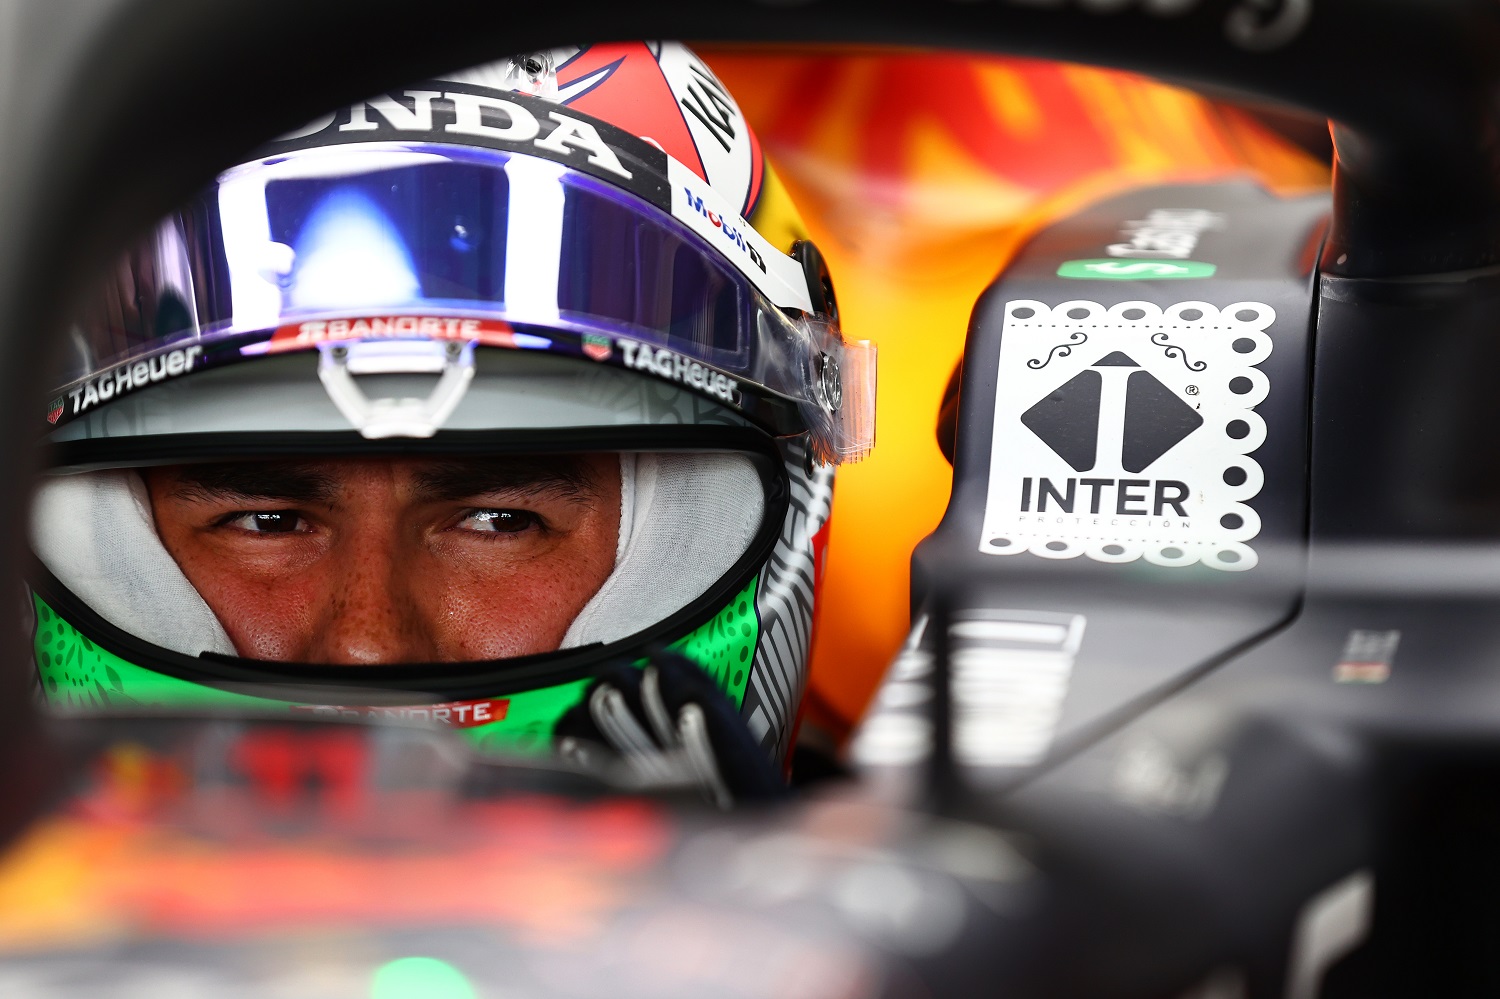 Sergio Perez of Mexico and Red Bull Racing prepares to drive during practice ahead of the F1 Grand Prix of Mexico at Autodromo Hermanos Rodriguez on Nov. 5, 2021 in Mexico City.